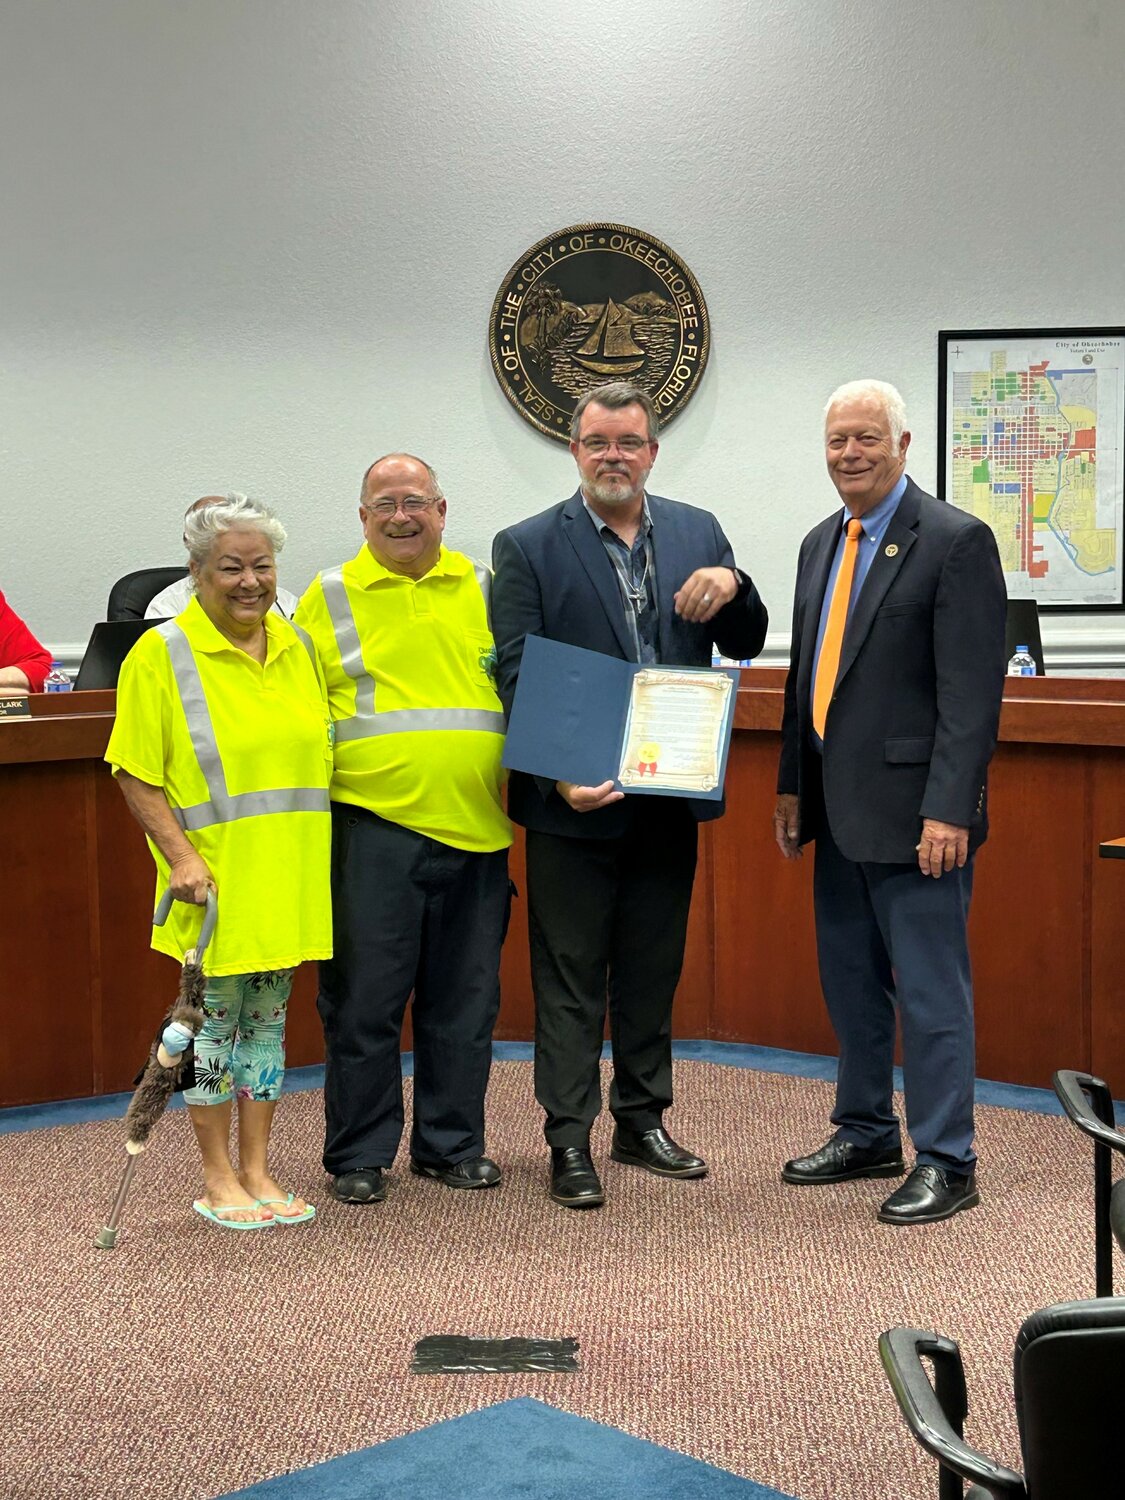 Mayor Dowling Watford (right) proclaims the month of September 2023 as Hunger Action Month. Accepting the proclamation are Juanita and Chuck Akers and Pastor Matt Bowen.